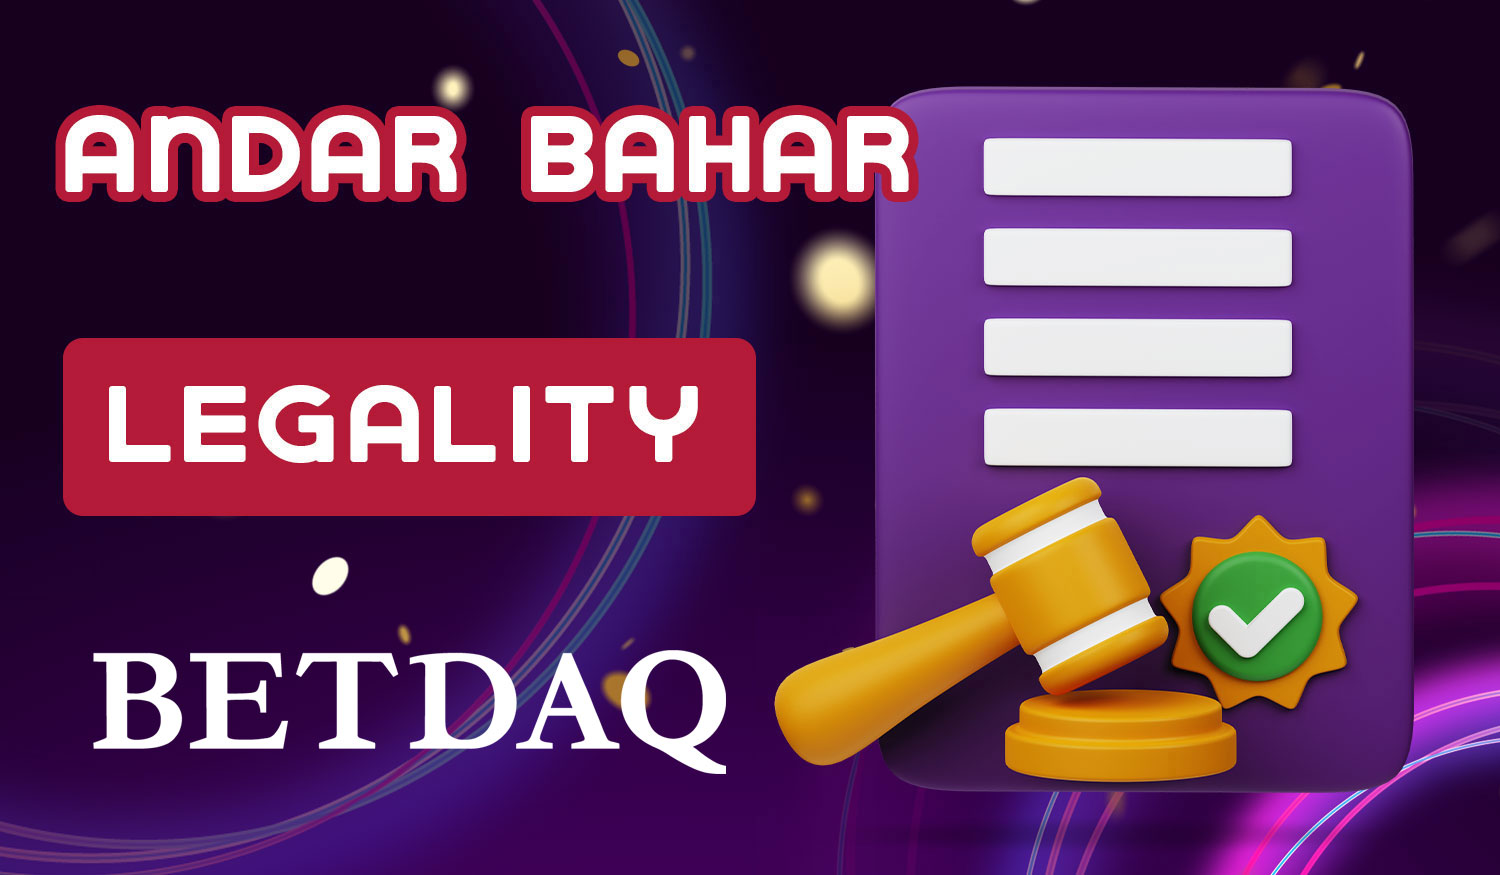 The legality of the Betdaq bookmaker in India